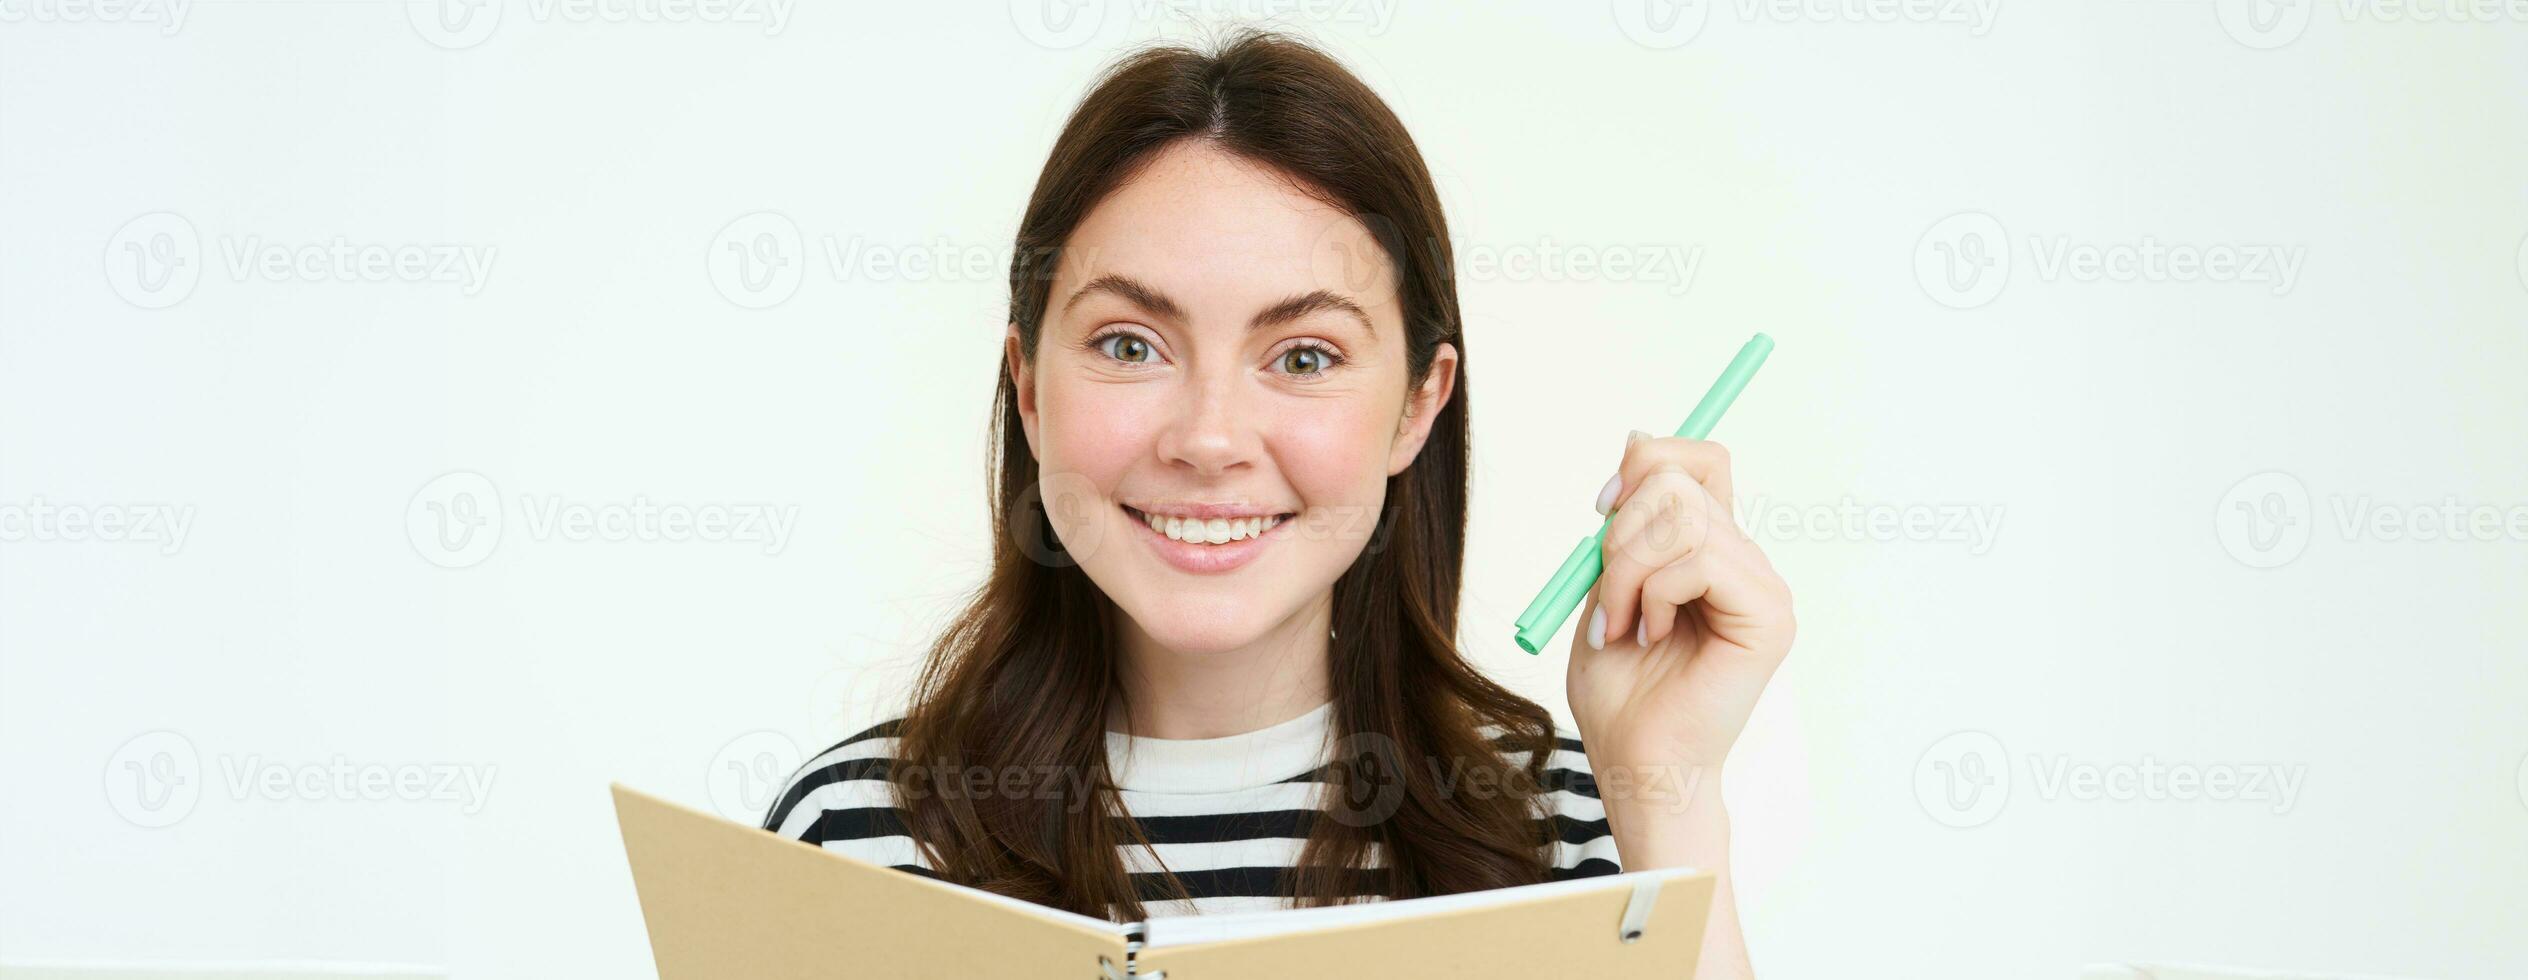 Portrait of creative smiling girl, writing down memos in planner, holding pen and notebook, makes notes, stands over white background photo